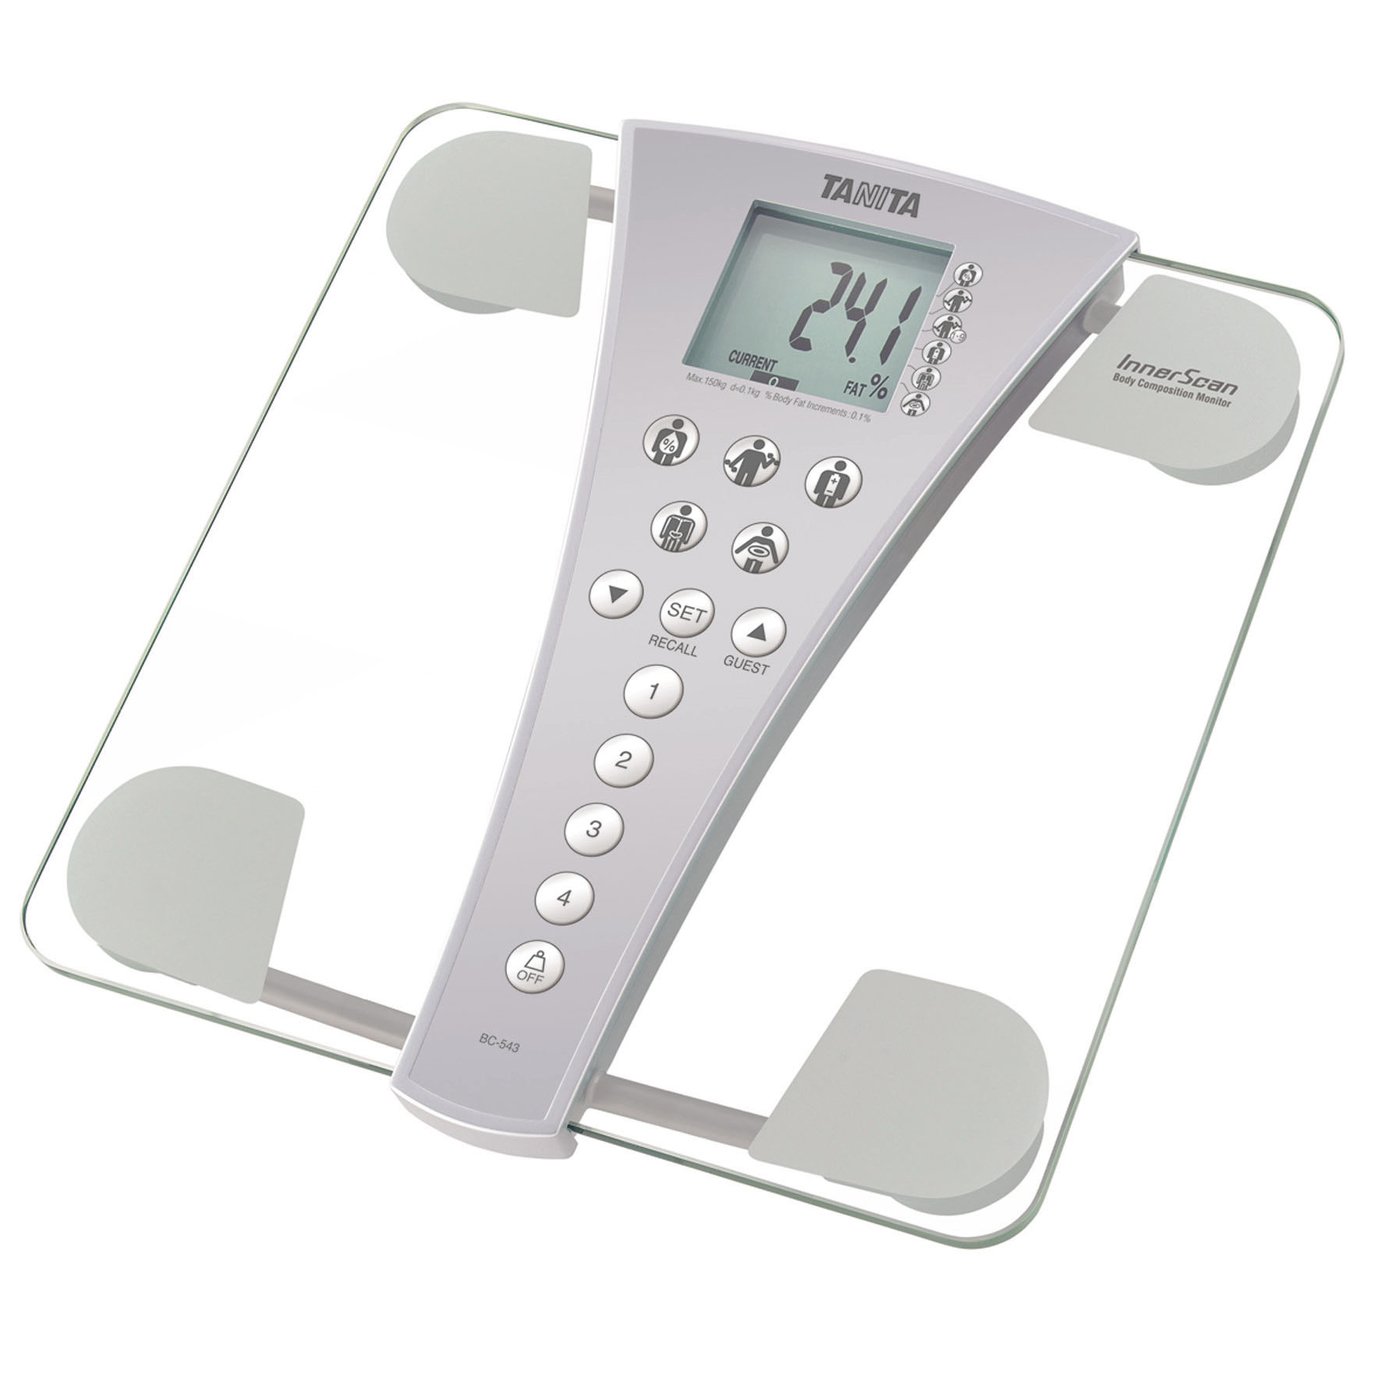 Tanita Body Composition BC543 Monitor Scale Review